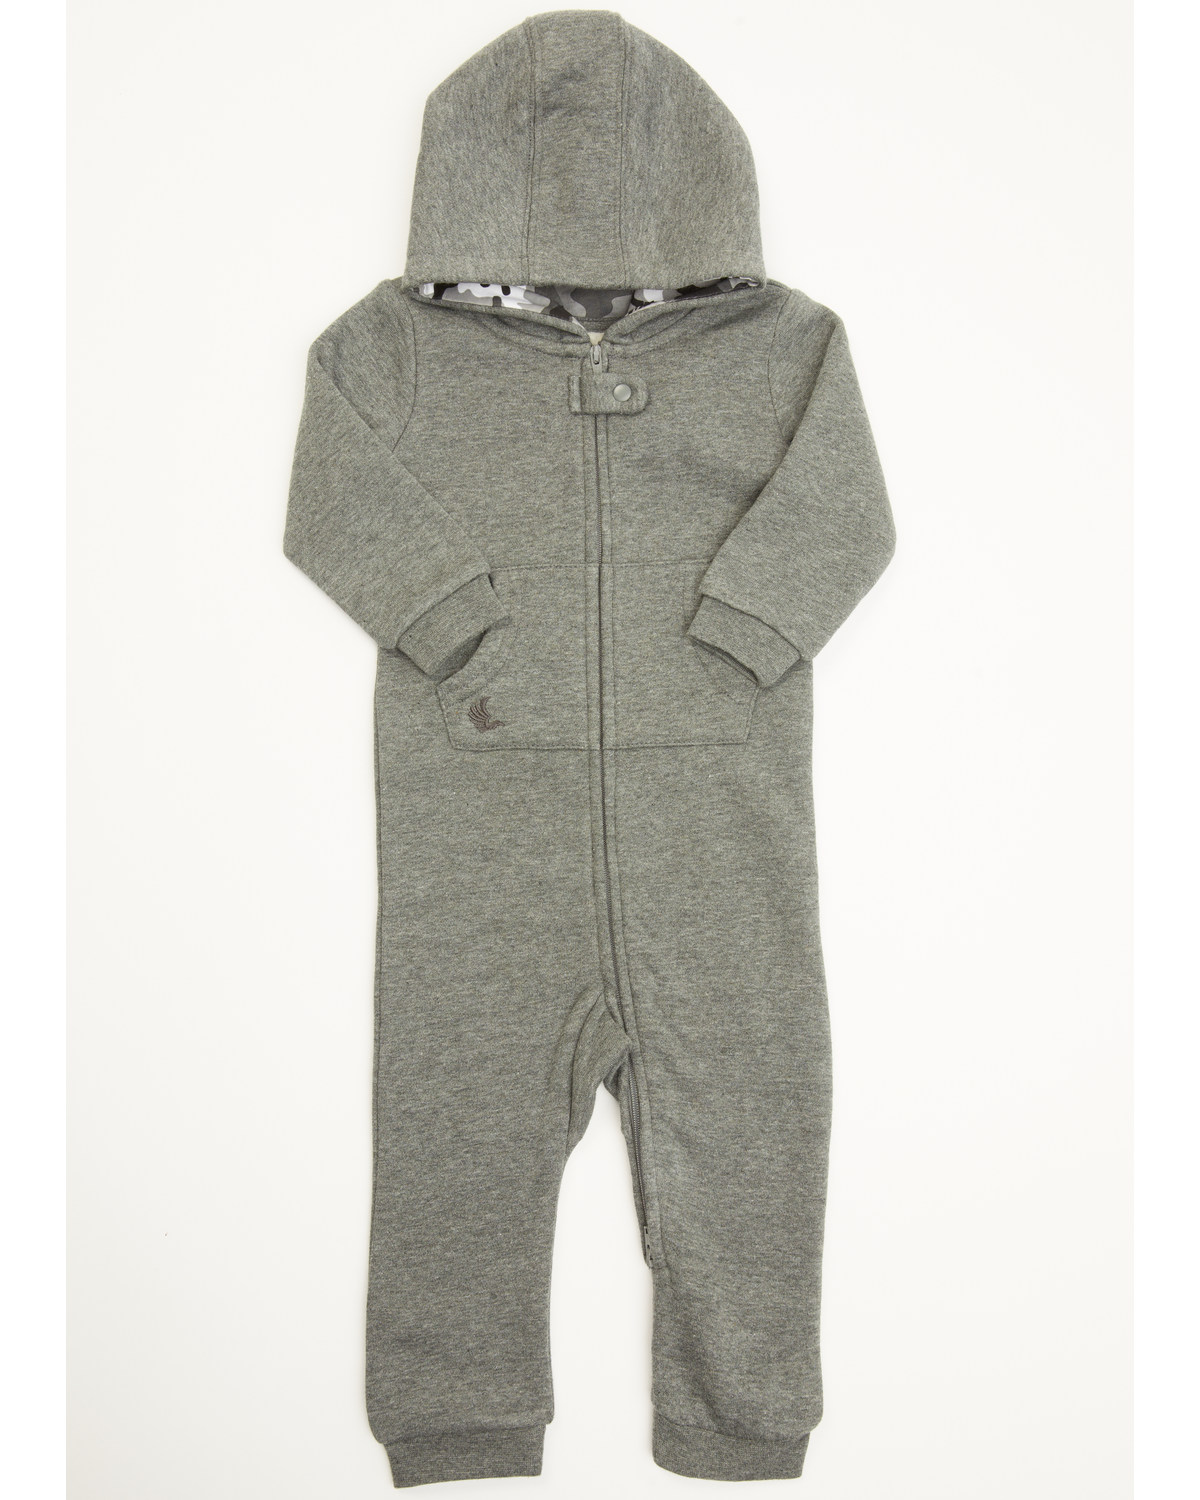 Cody James Infant Boys' Hooded Coveralls